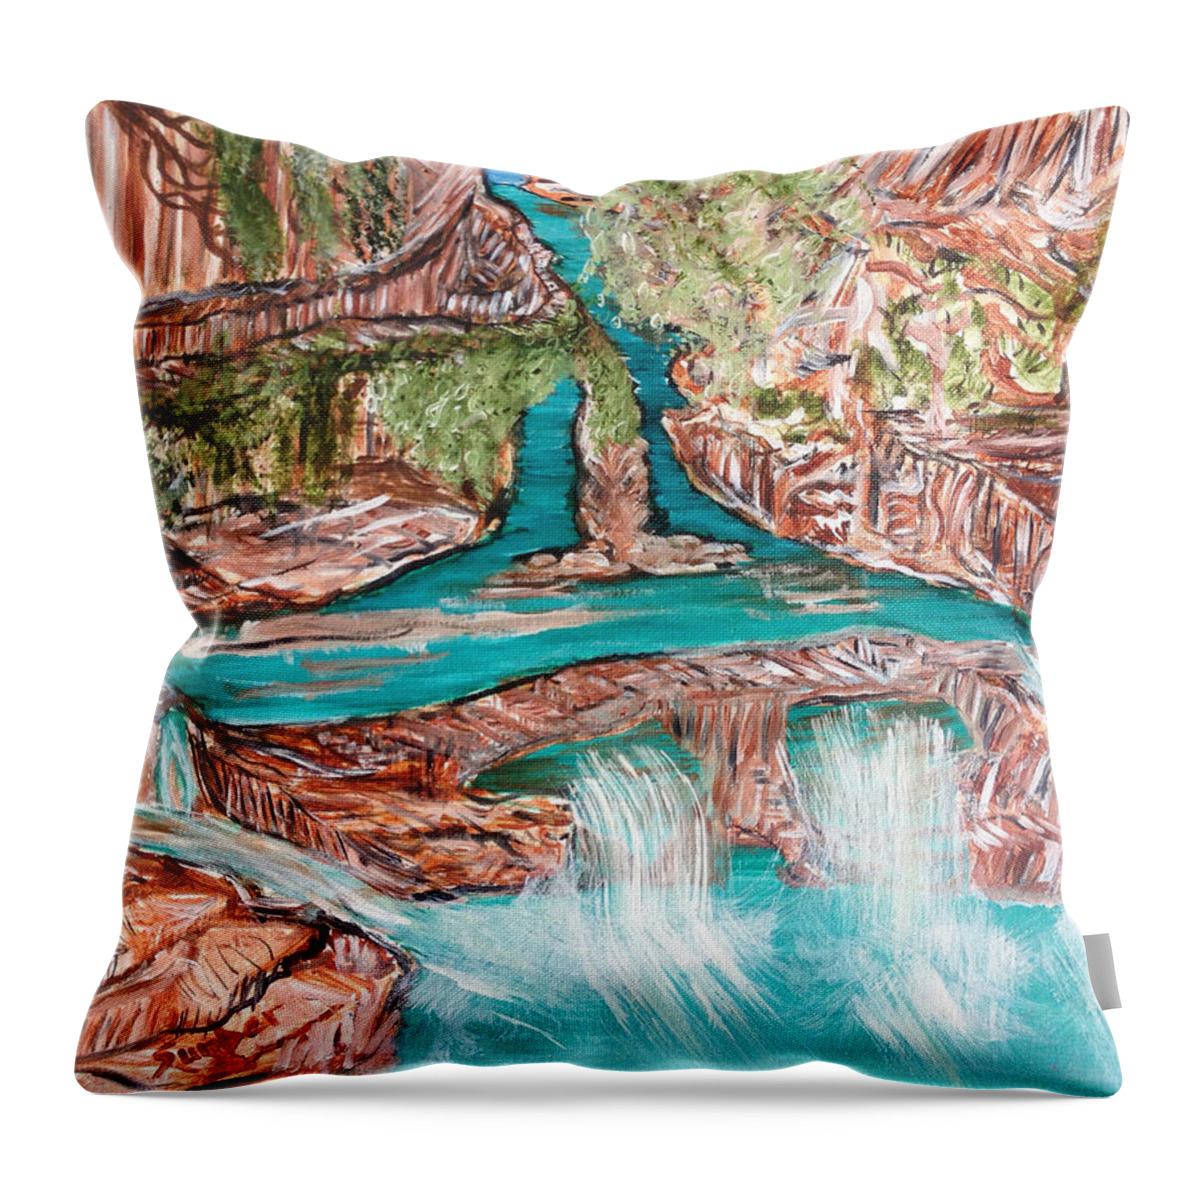 New Painting Throw Pillow featuring the painting No Name Falls by Suzanne Surber